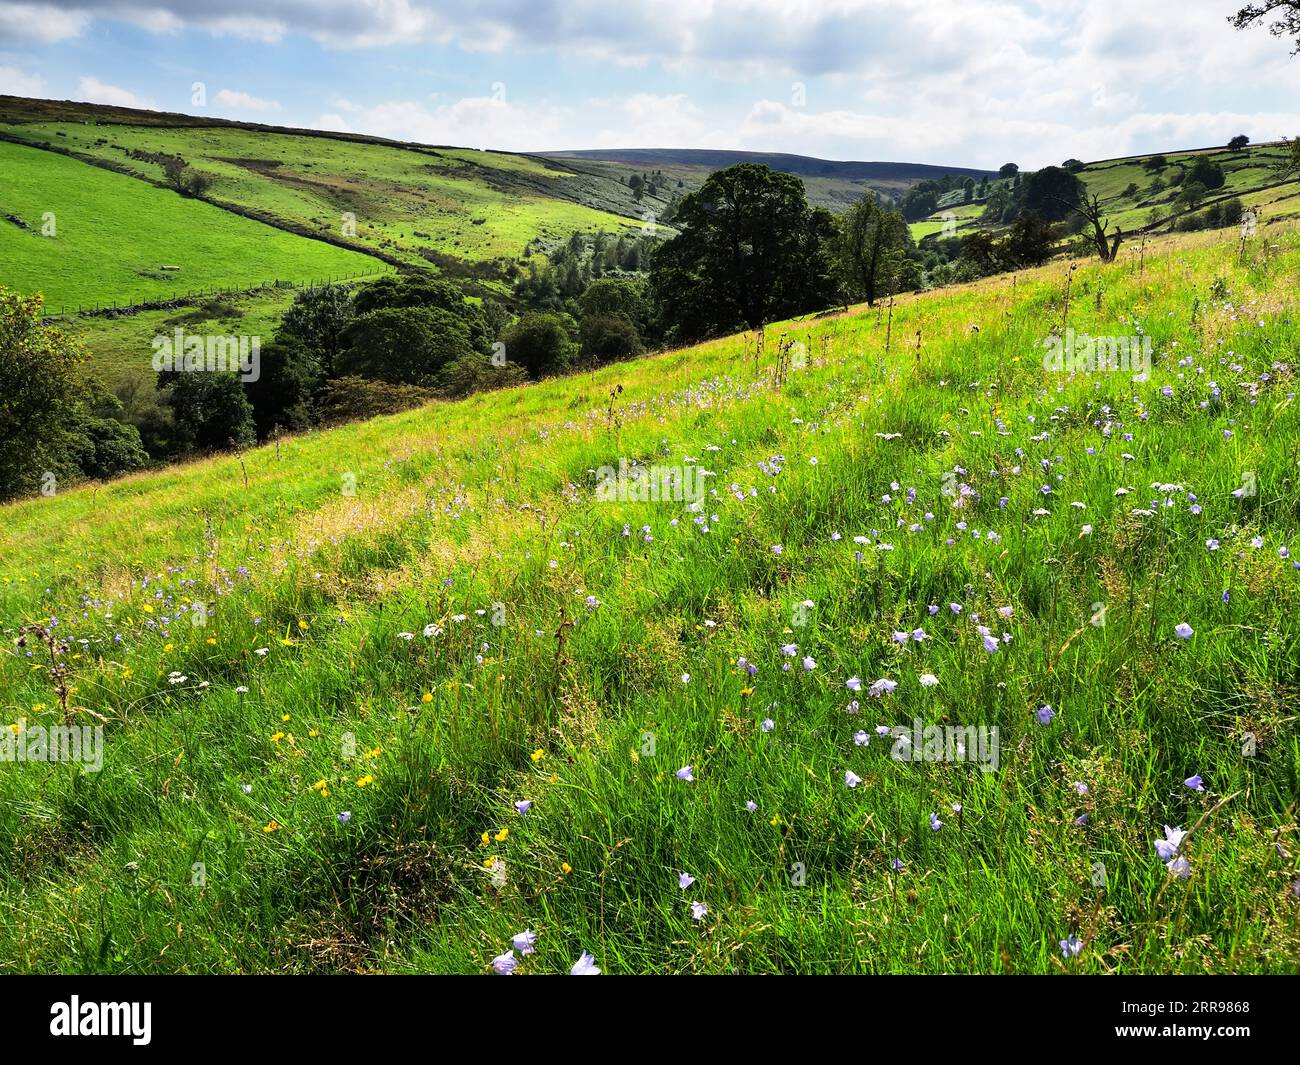 Harebell wildflowers in bloom on a hillside near Haworth West Yorkshire England Stock Photo